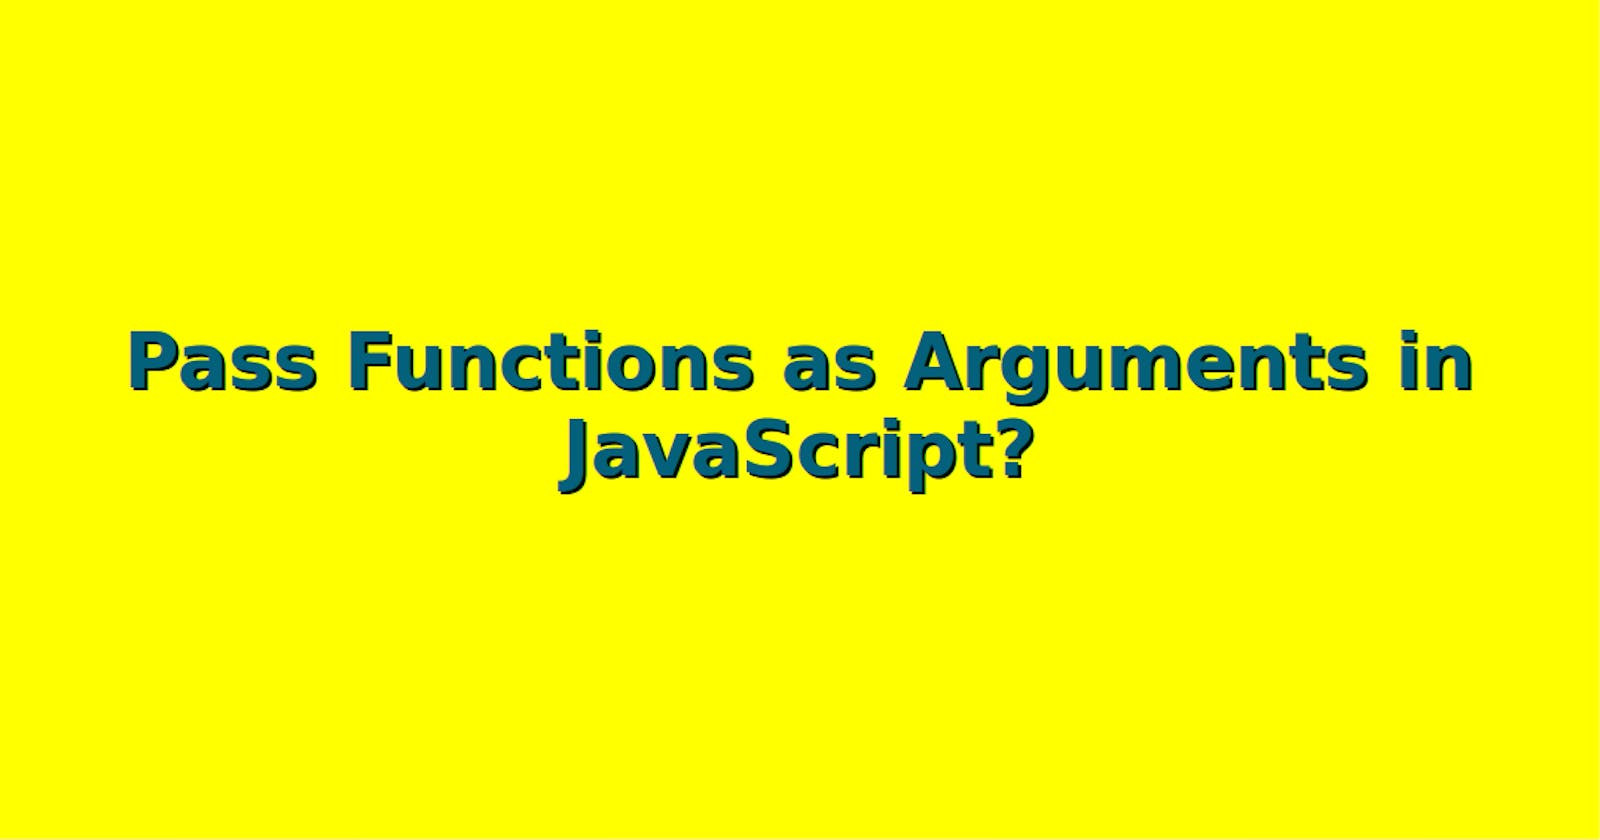 Pass Functions as Arguments in JavaScript?